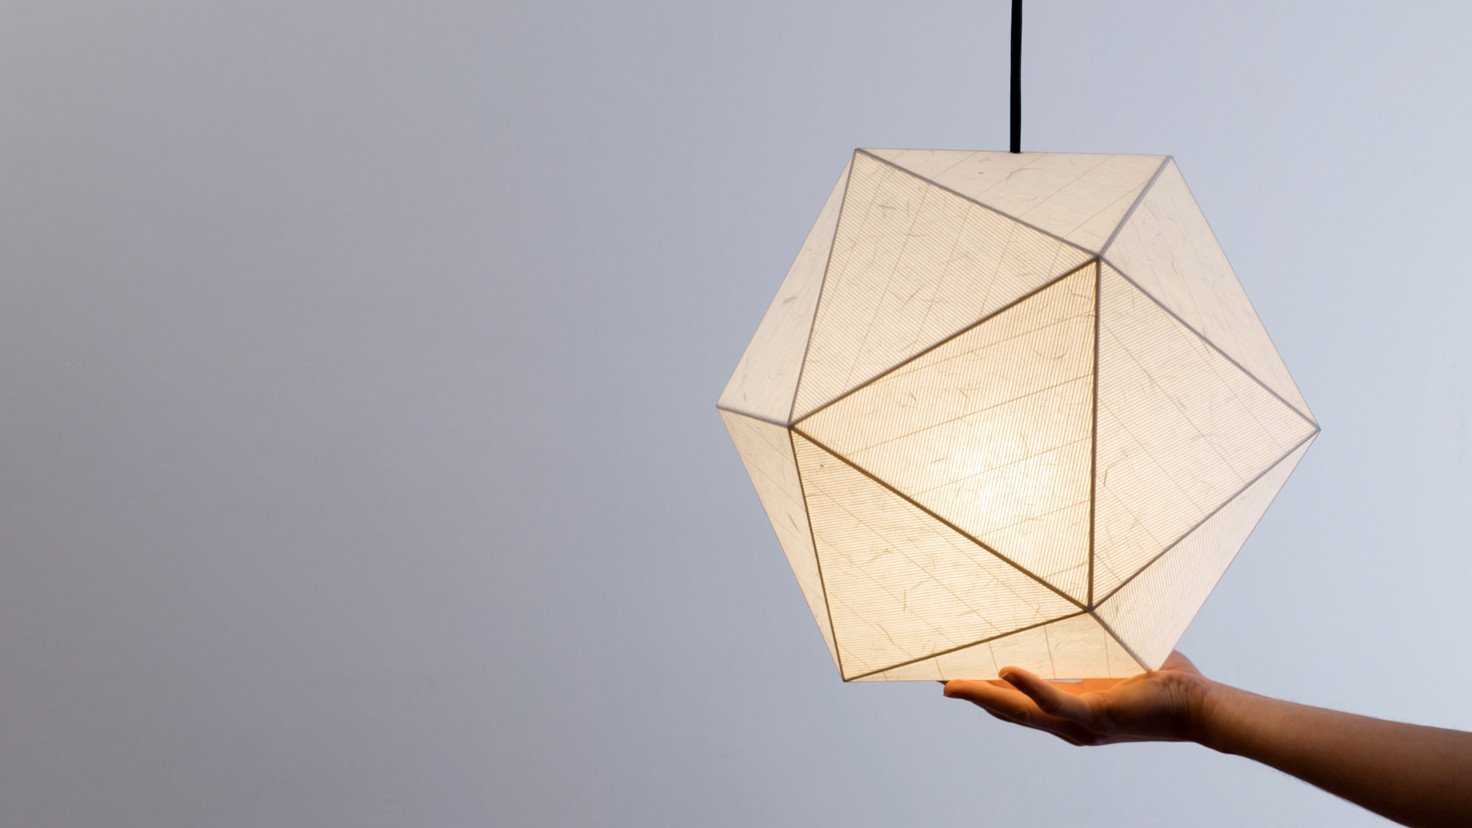 Download Werteloberfell 3d Prints Onto Japanese Silk Paper To Create Panel Light Structures All3dp